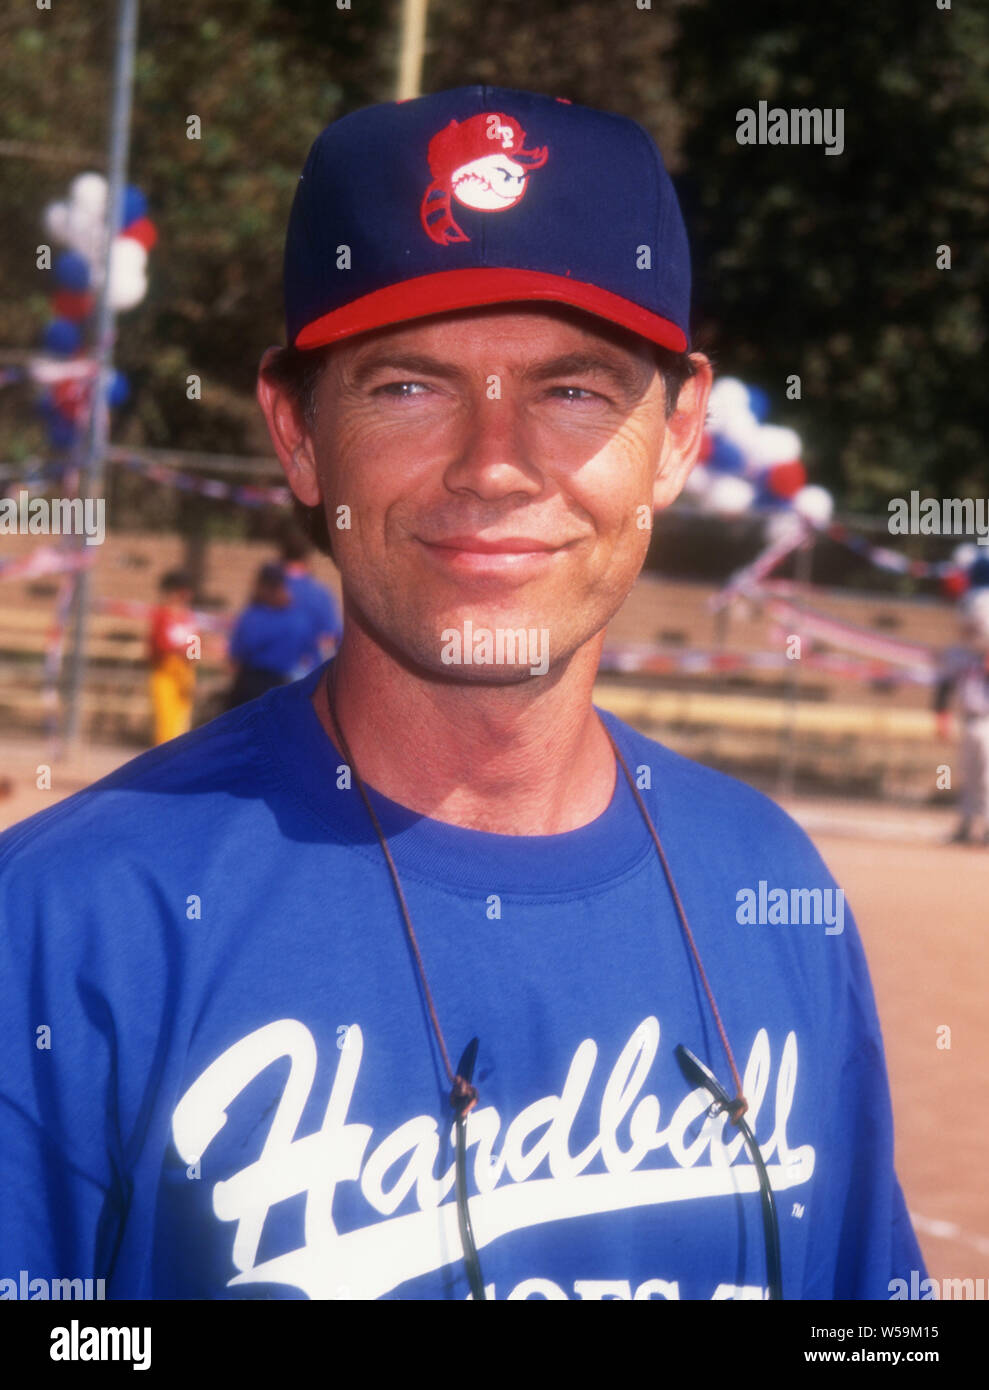 Los Angeles, California, USA 12th October 1994 Actor Bruce Greenwood  attends Hardball Goes To B.A.T. baseball game on October 12, 1994 in Los  Angeles, California, USA. Photo by Barry King/Alamy Stock Photo